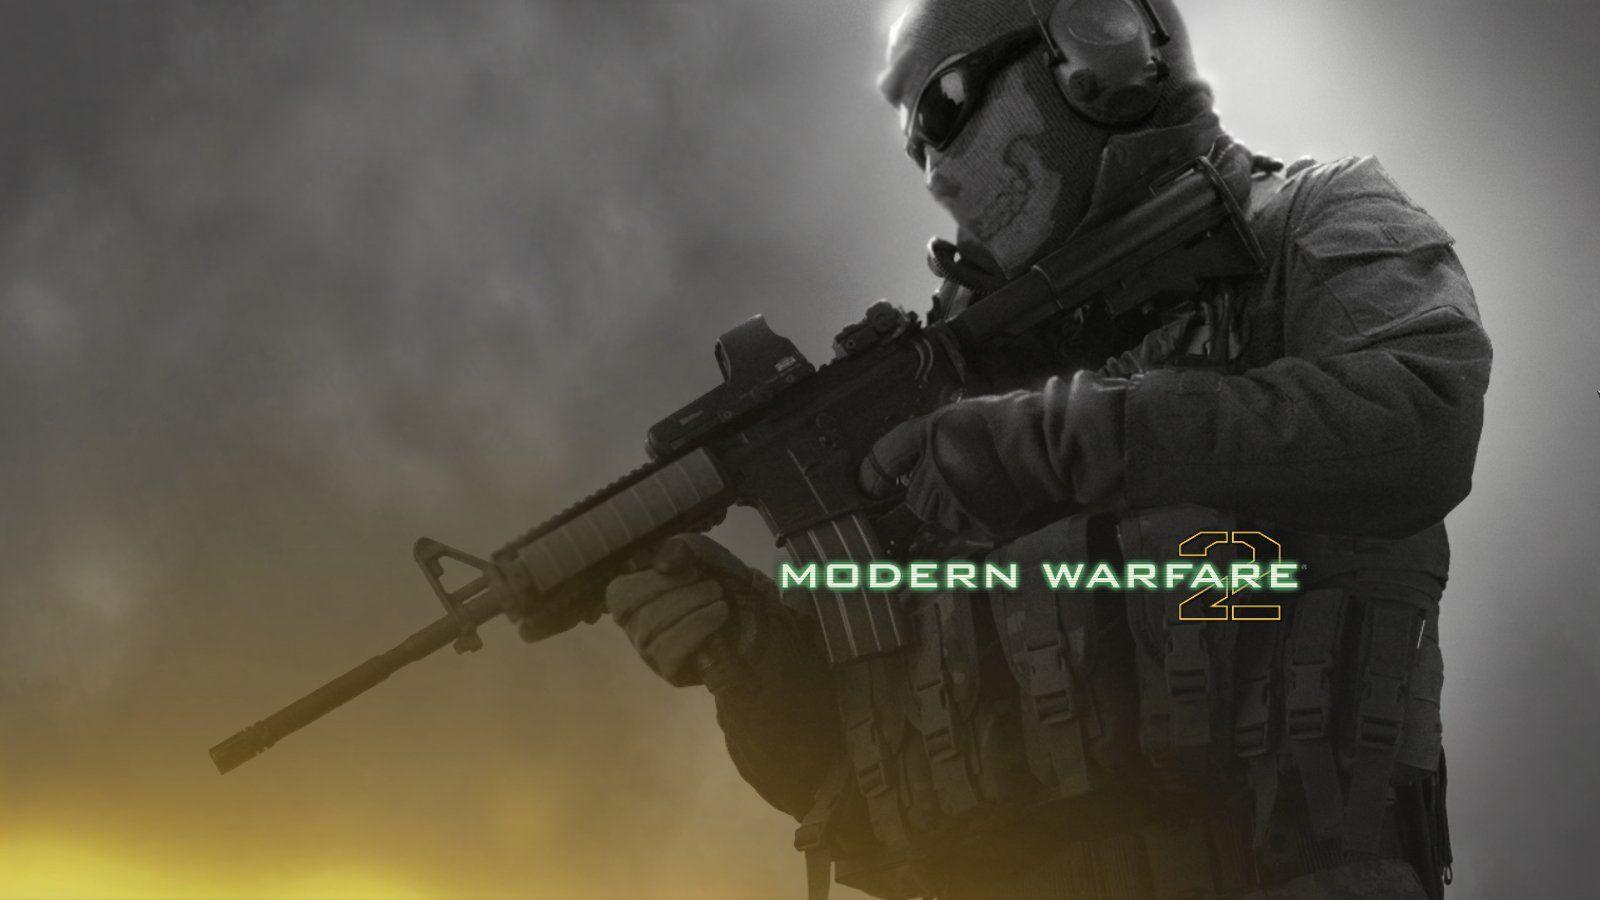 Captain Price Wallpapers - Top Free Captain Price Backgrounds